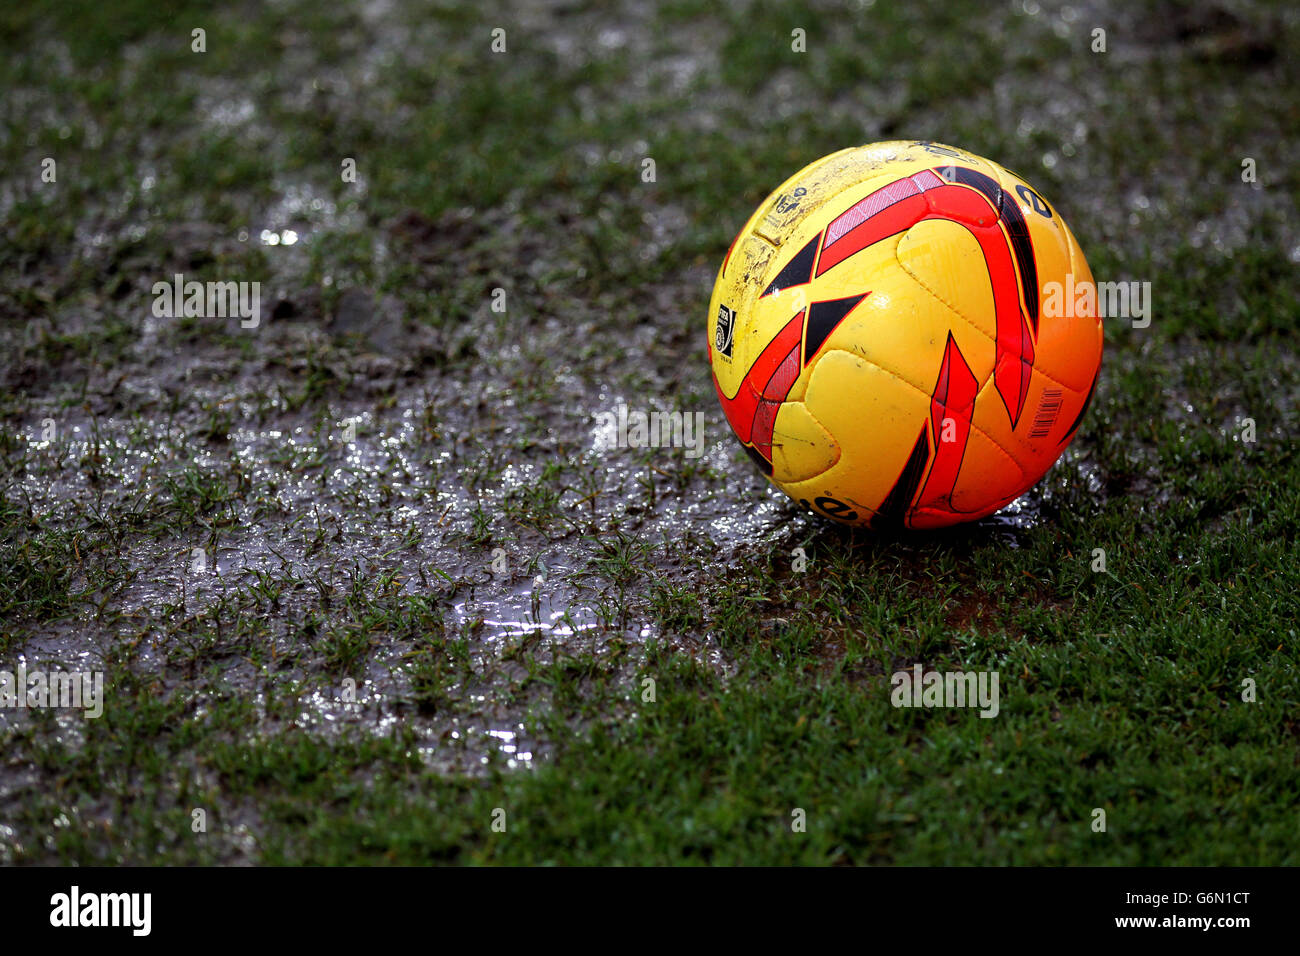 Soccer - Sky Bet League One - Swindon Town v Coventry City - County Ground. The match day match ball Stock Photo